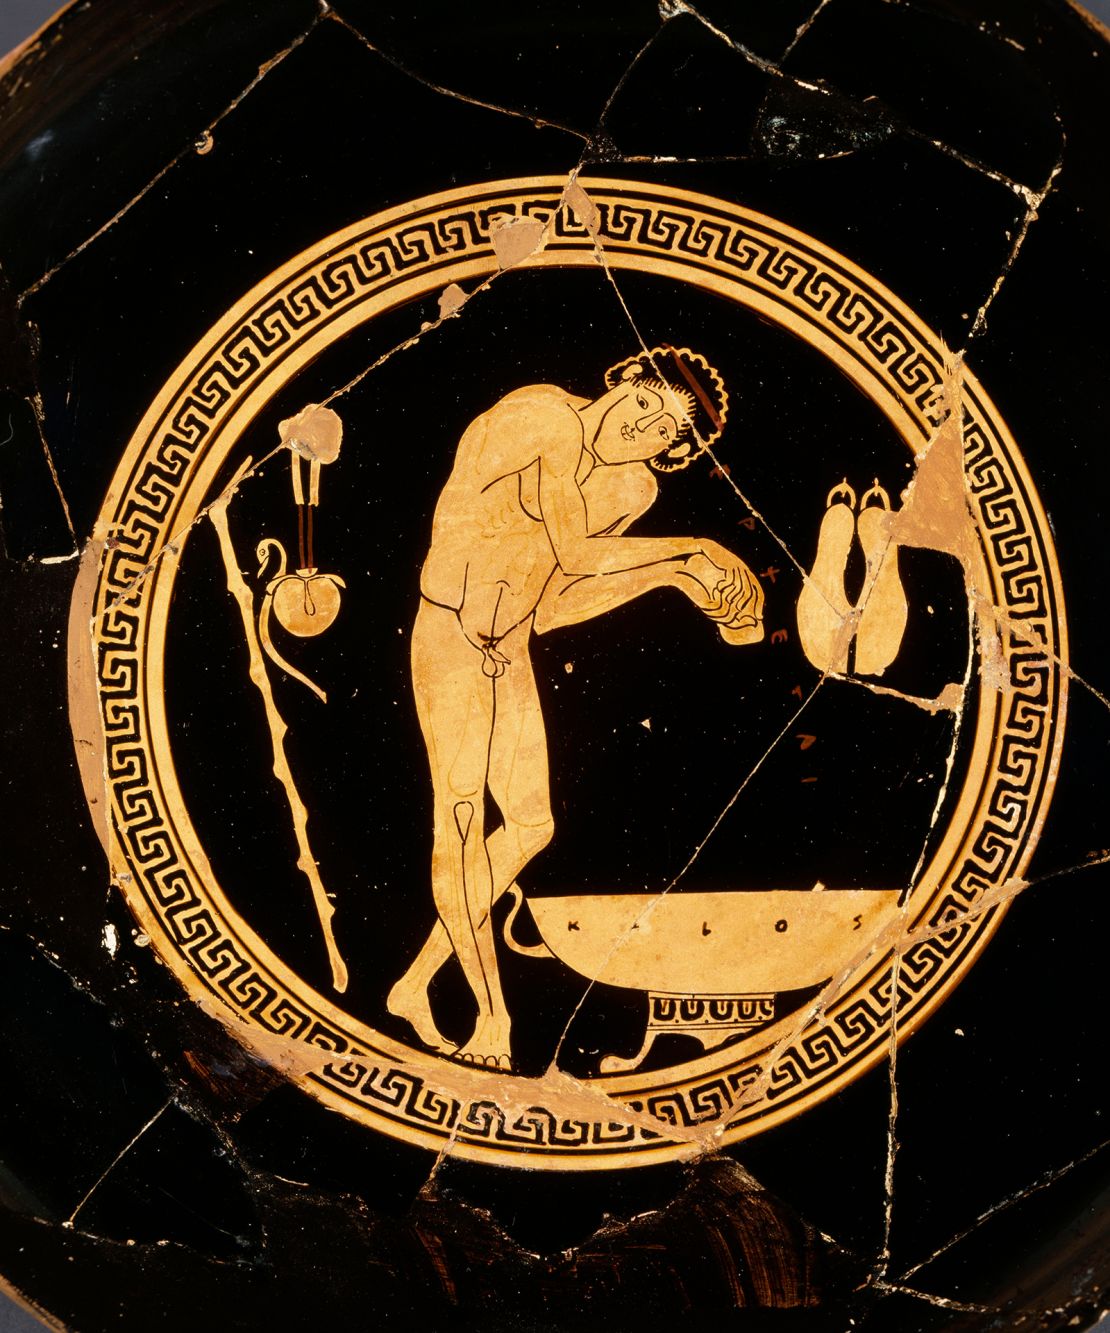 A detail of a pottery work attributed to Athenian vase painter Onesimos circa 500 BC. It shows the routines of Ancient Greek athletes, who applied oils before training in the sun, followed by bathing and vigorous scraping with a strigil tool.